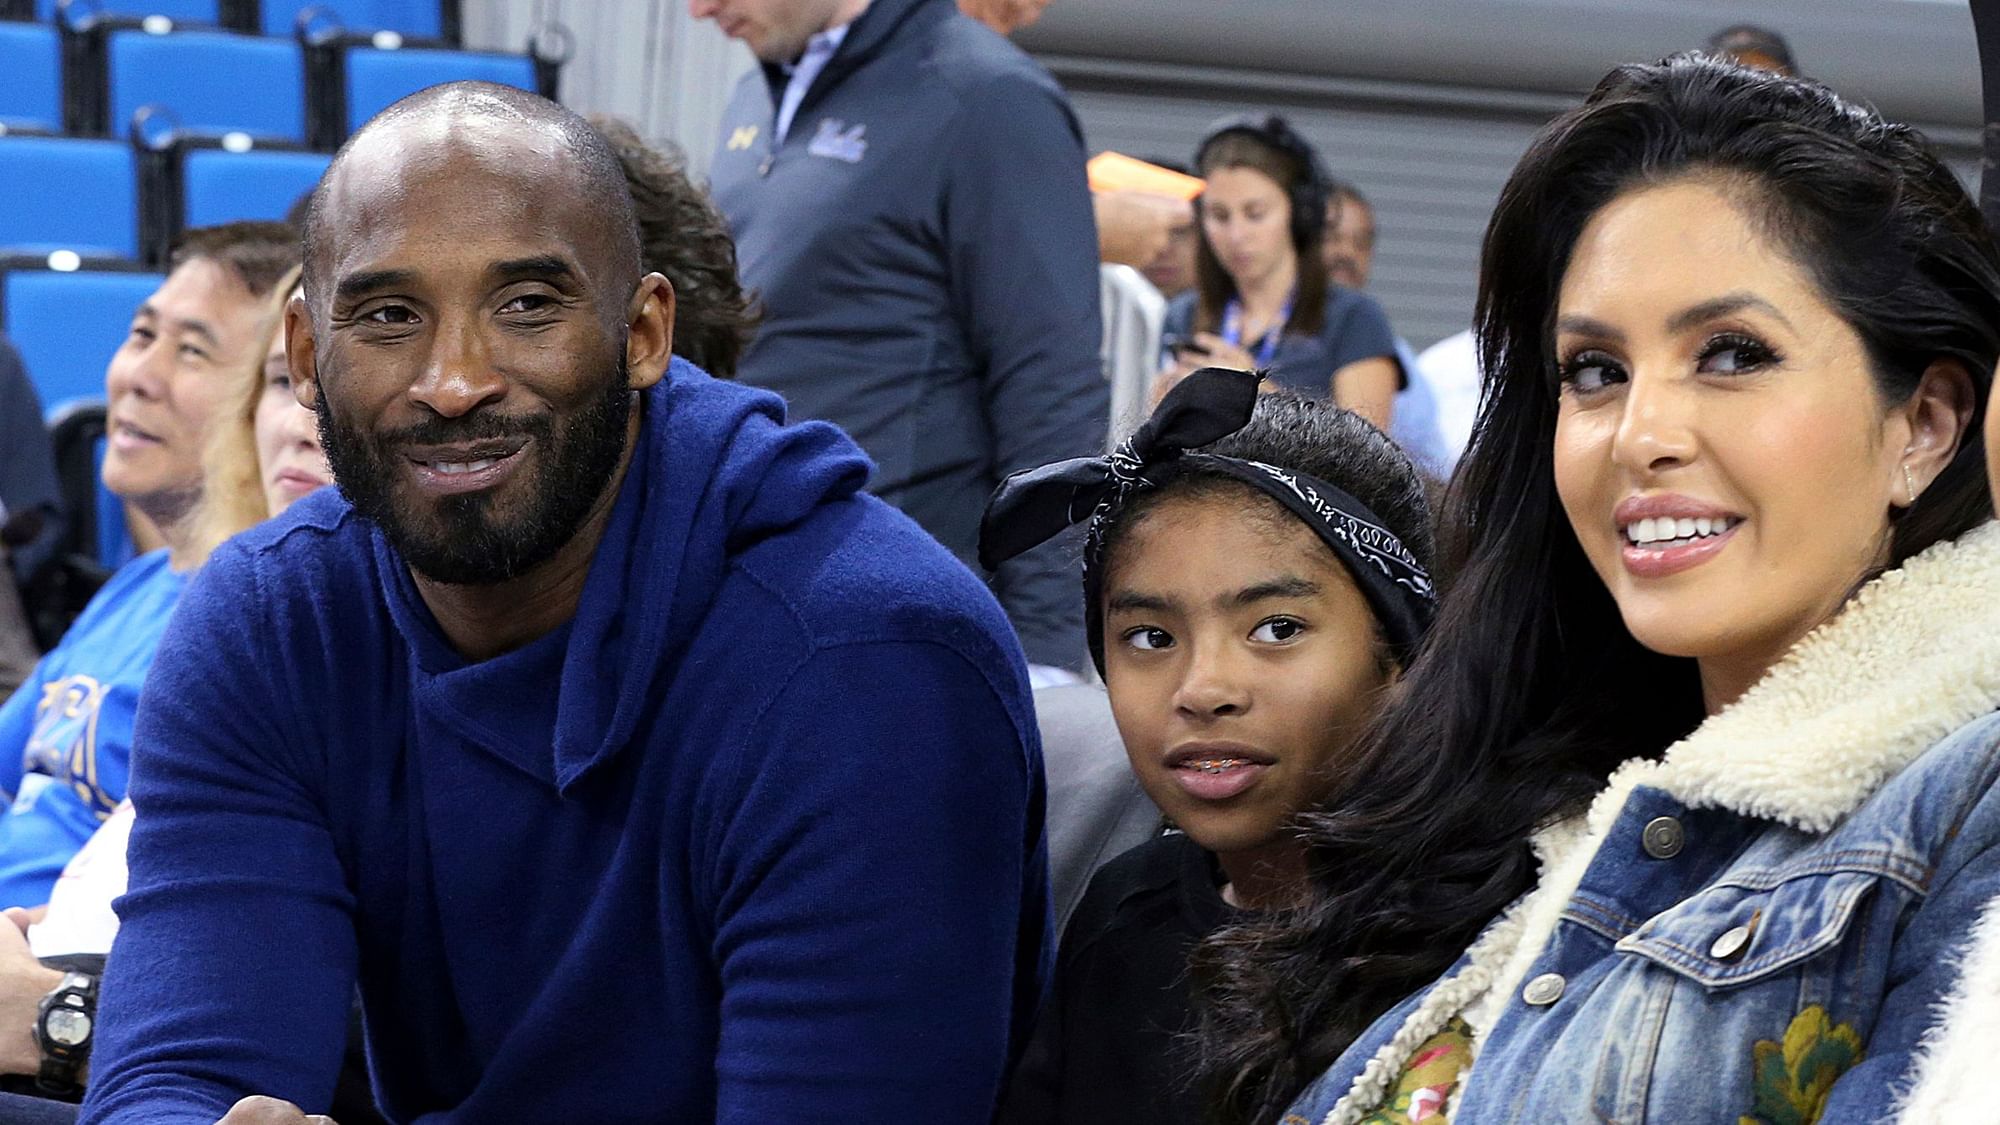 The lawsuit was filed the morning that a star-studded public memorial service for Kobe Bryant, his daughter was held before a sold-out crowd at Staples Center.